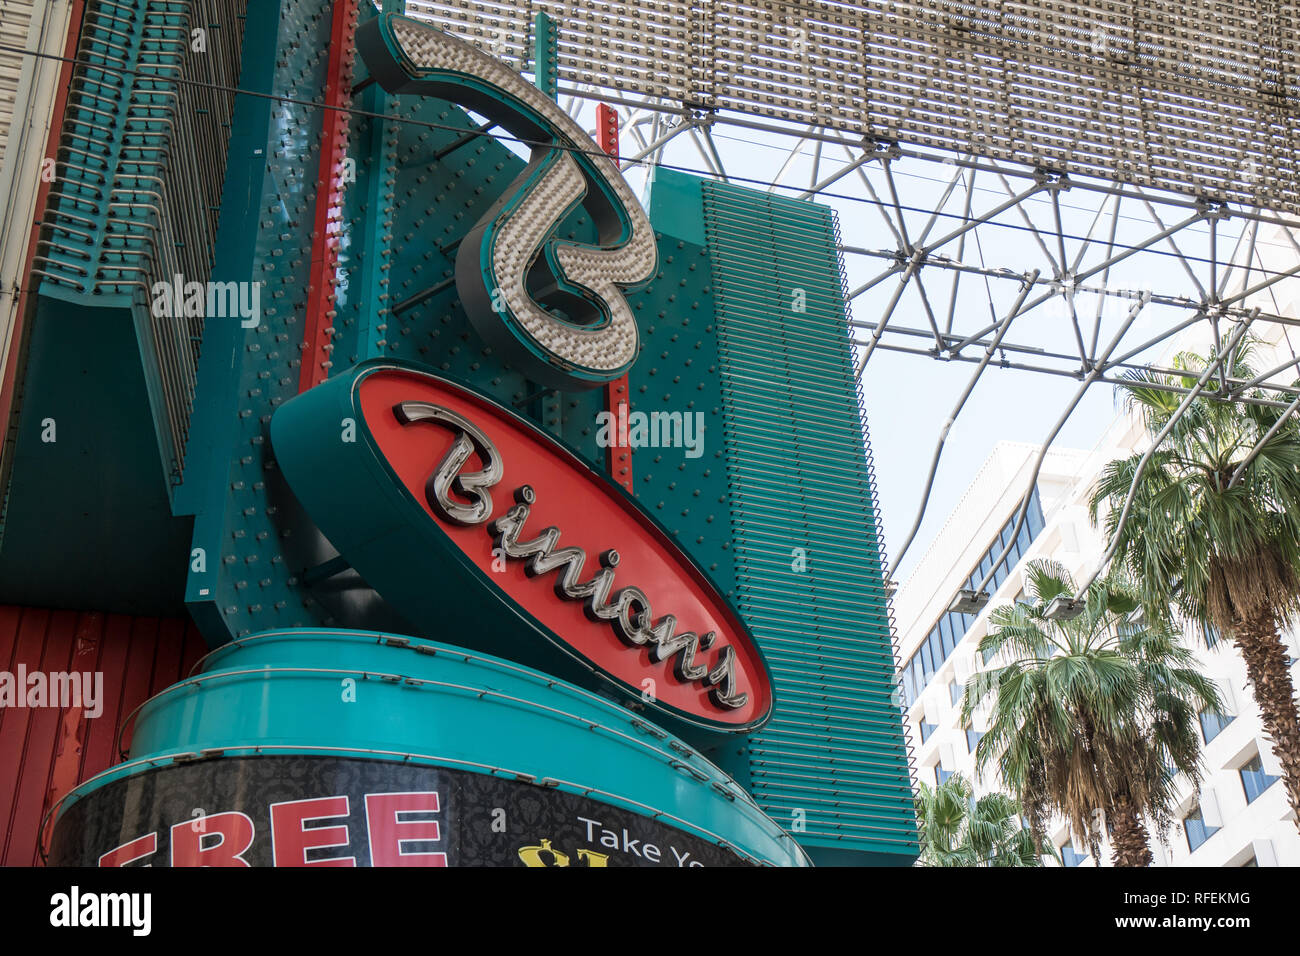 Las Vegas, Nevada - October 13, 2017: Sign for the Binions hotel and casino in downtown Las Vegas under the Fremont Street Experience canopy during th Stock Photo